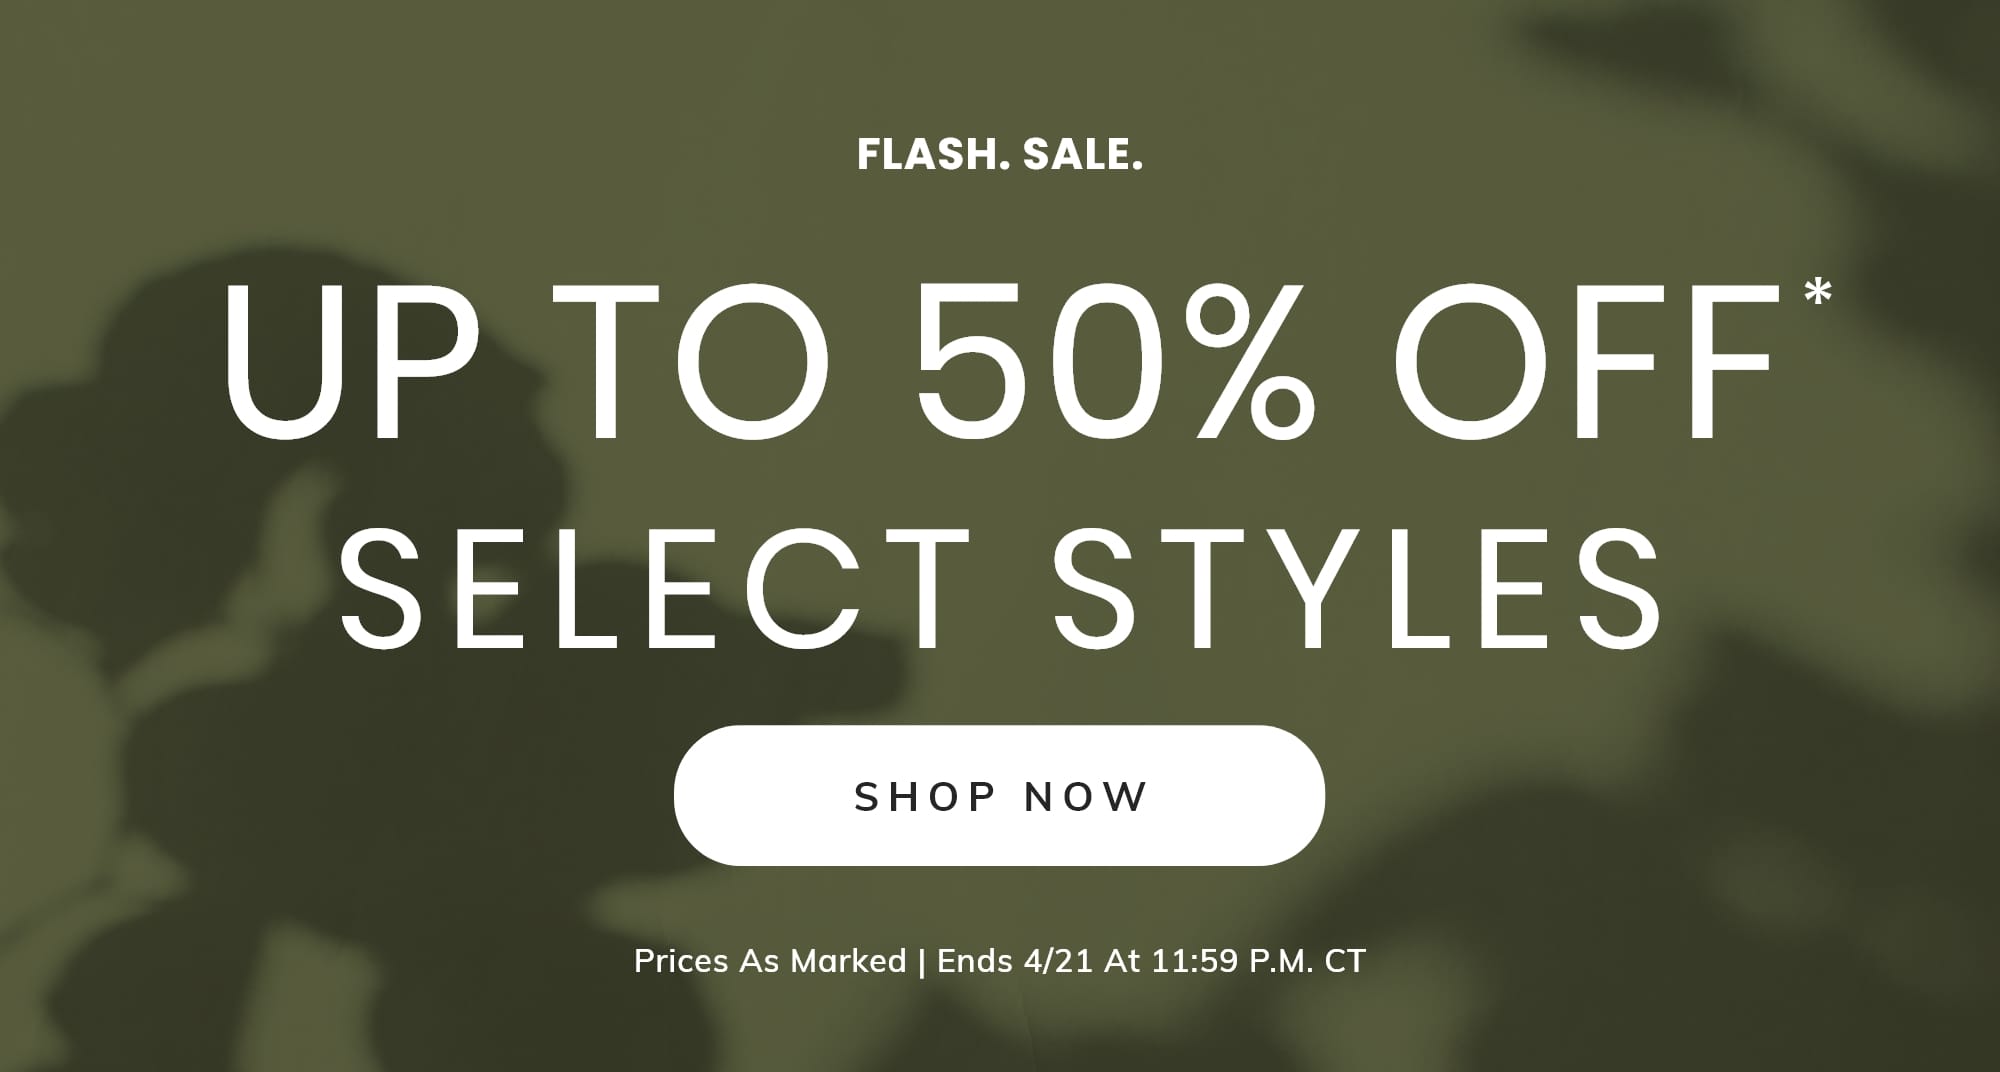 UP TO 50% OFF* SELECT STYLES